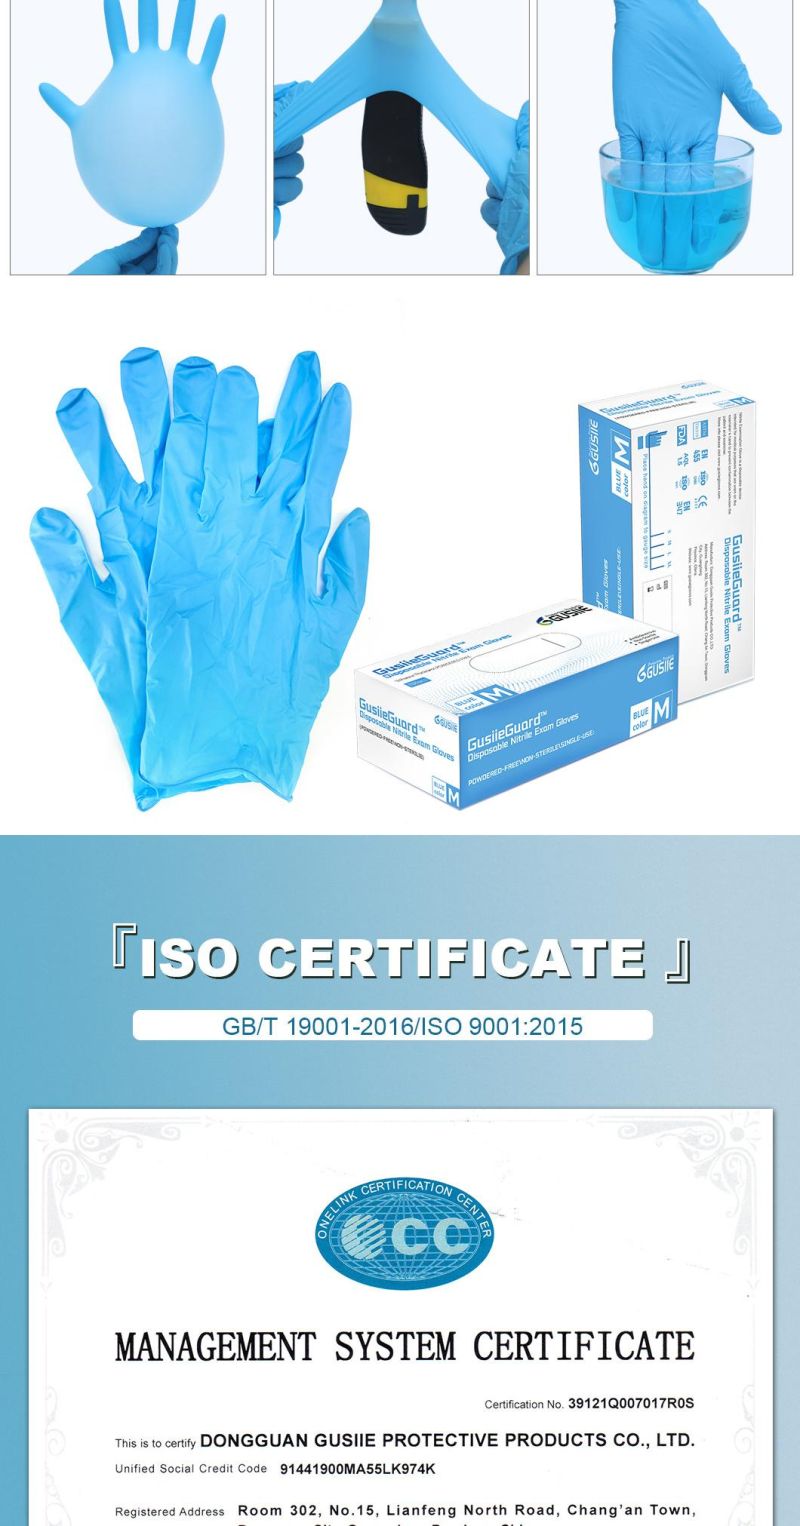 Gusiie Disposable Medical Inspection Gloves Household Waterproof Cleaning Gloves